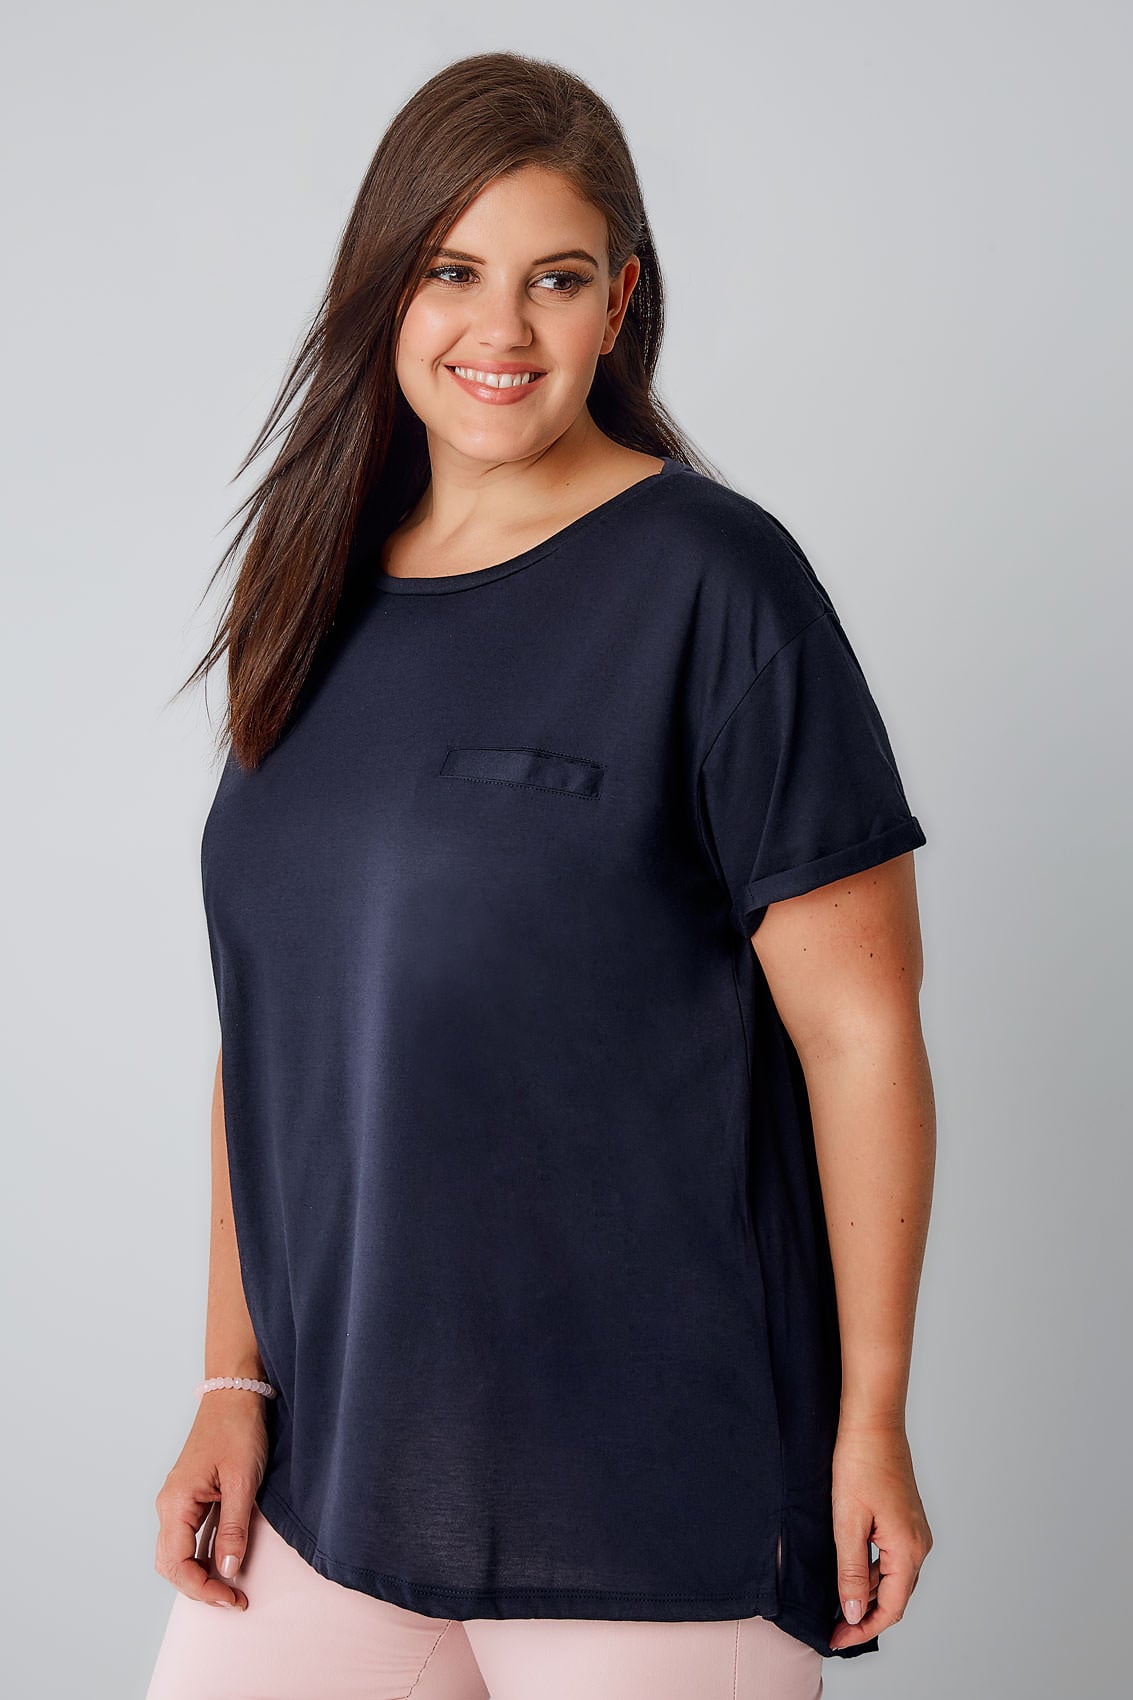 Red Pocket T-Shirt With Curved Hem, Plus size 16 to 36